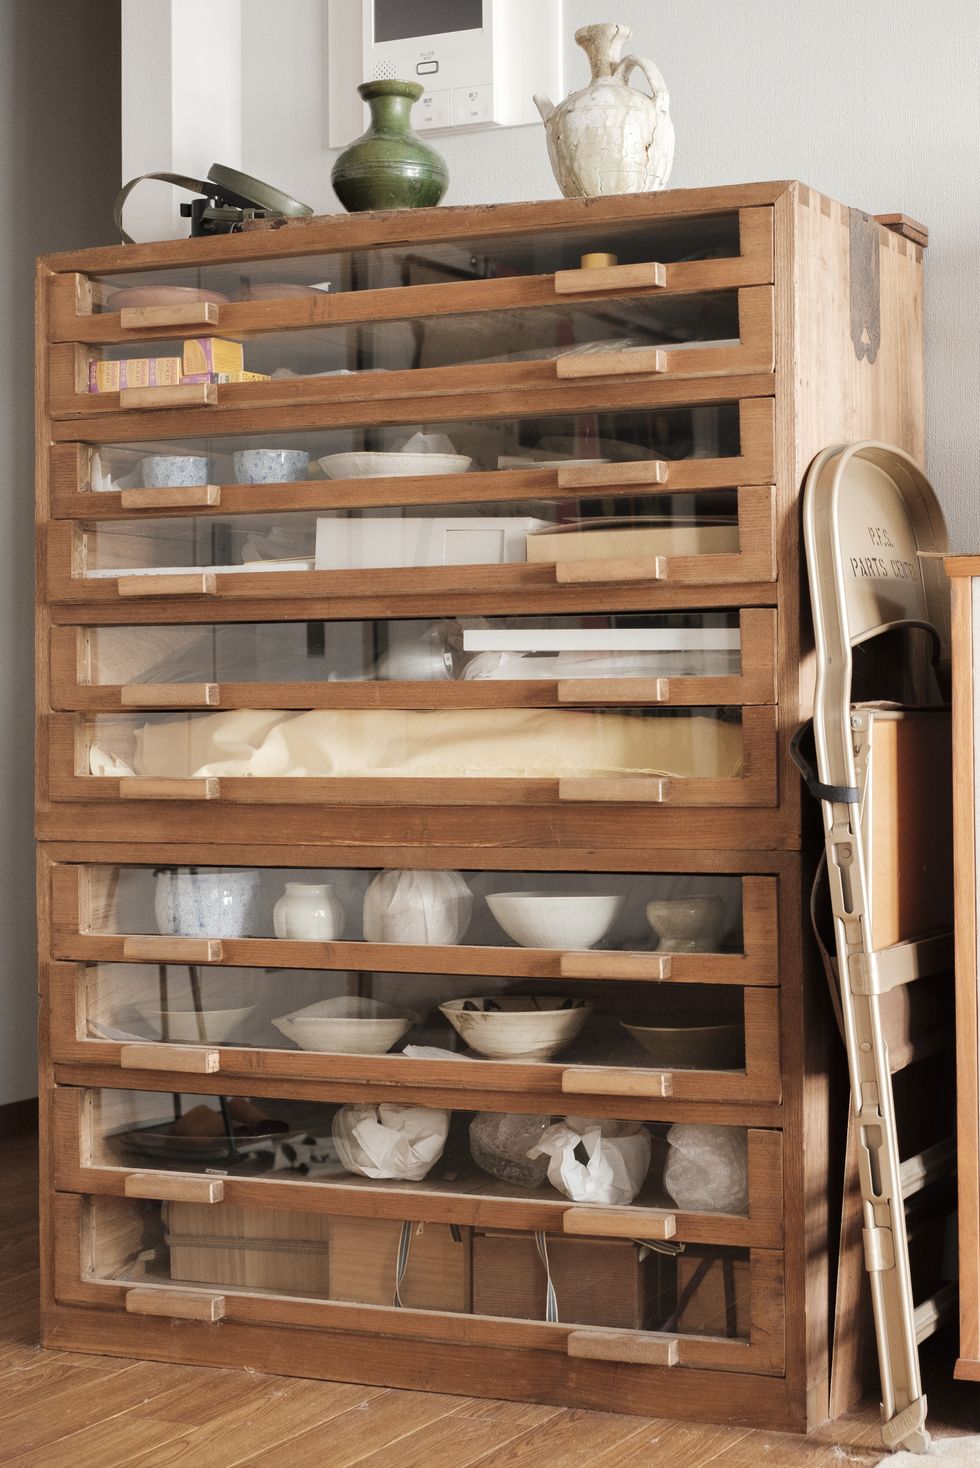 a wooden shelving unit with white cats and white cats